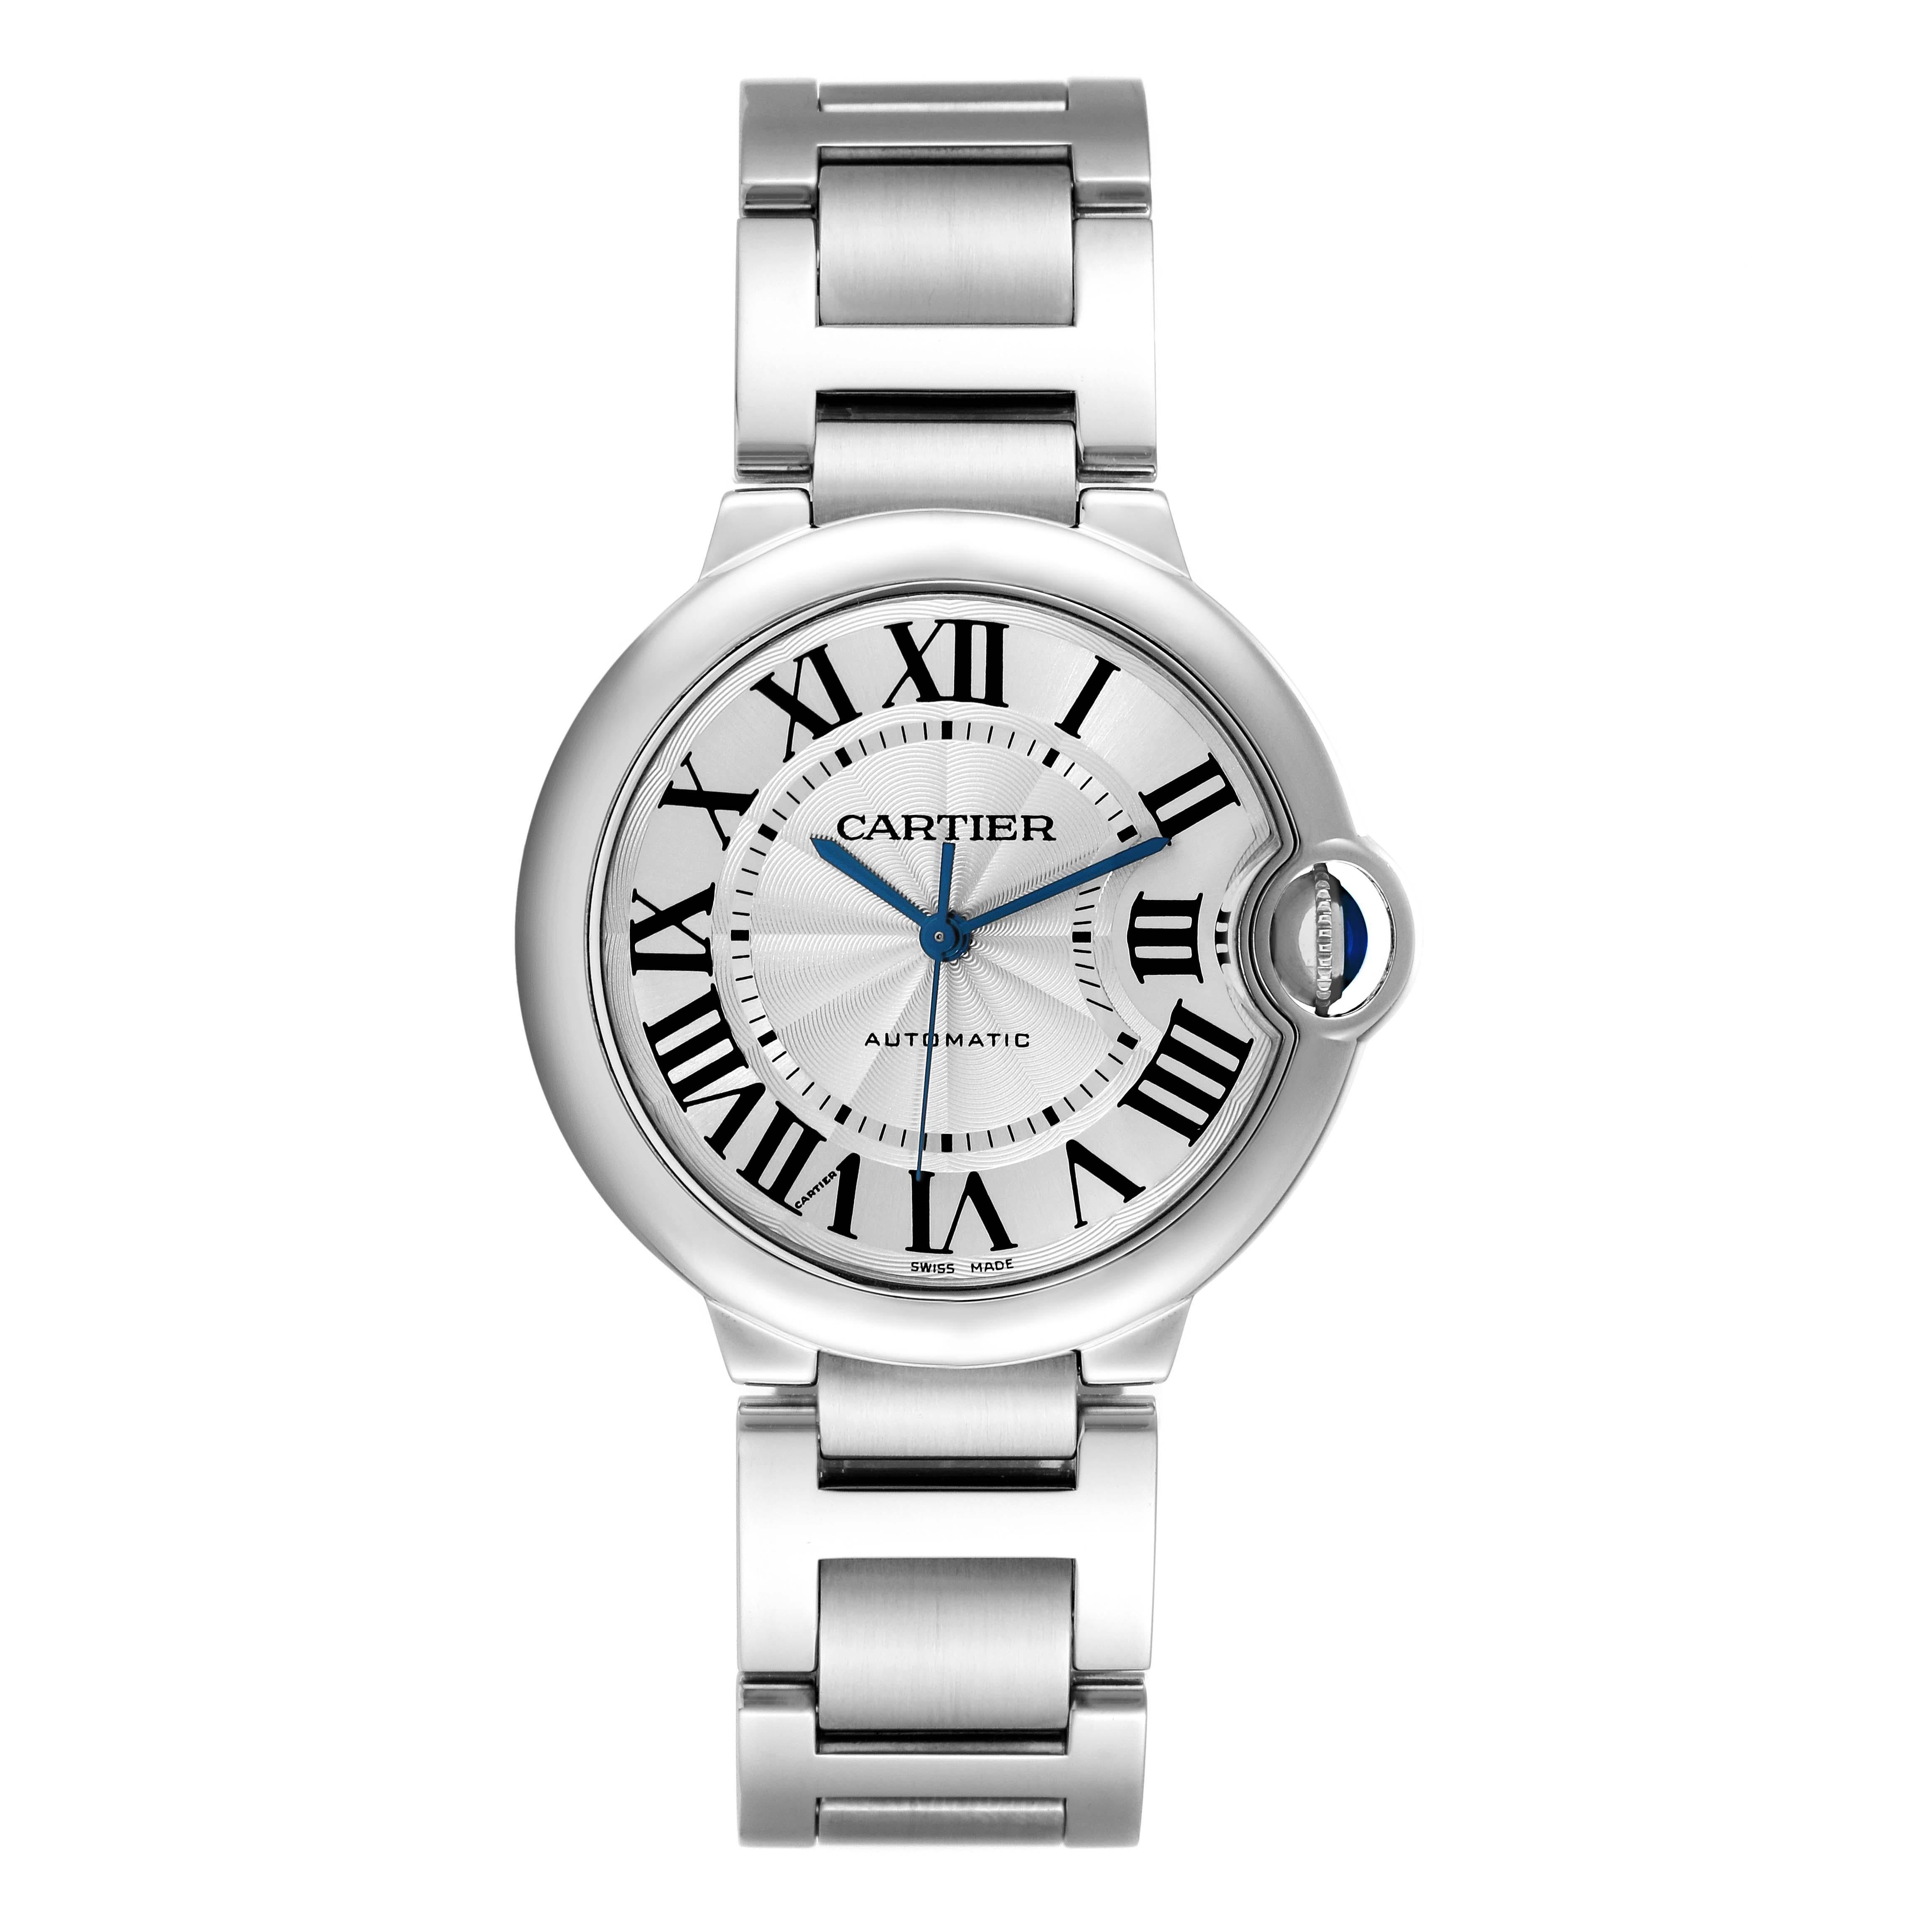 Cartier Ballon Bleu Midsize Silver Dial Steel Ladies Watch W6920046. Automatic self-winding movement. Stainless steel case 36.6 mm in diameter. Fluted crown set with the blue spinel cabochon. Stainless steel smooth bezel. Scratch resistant sapphire